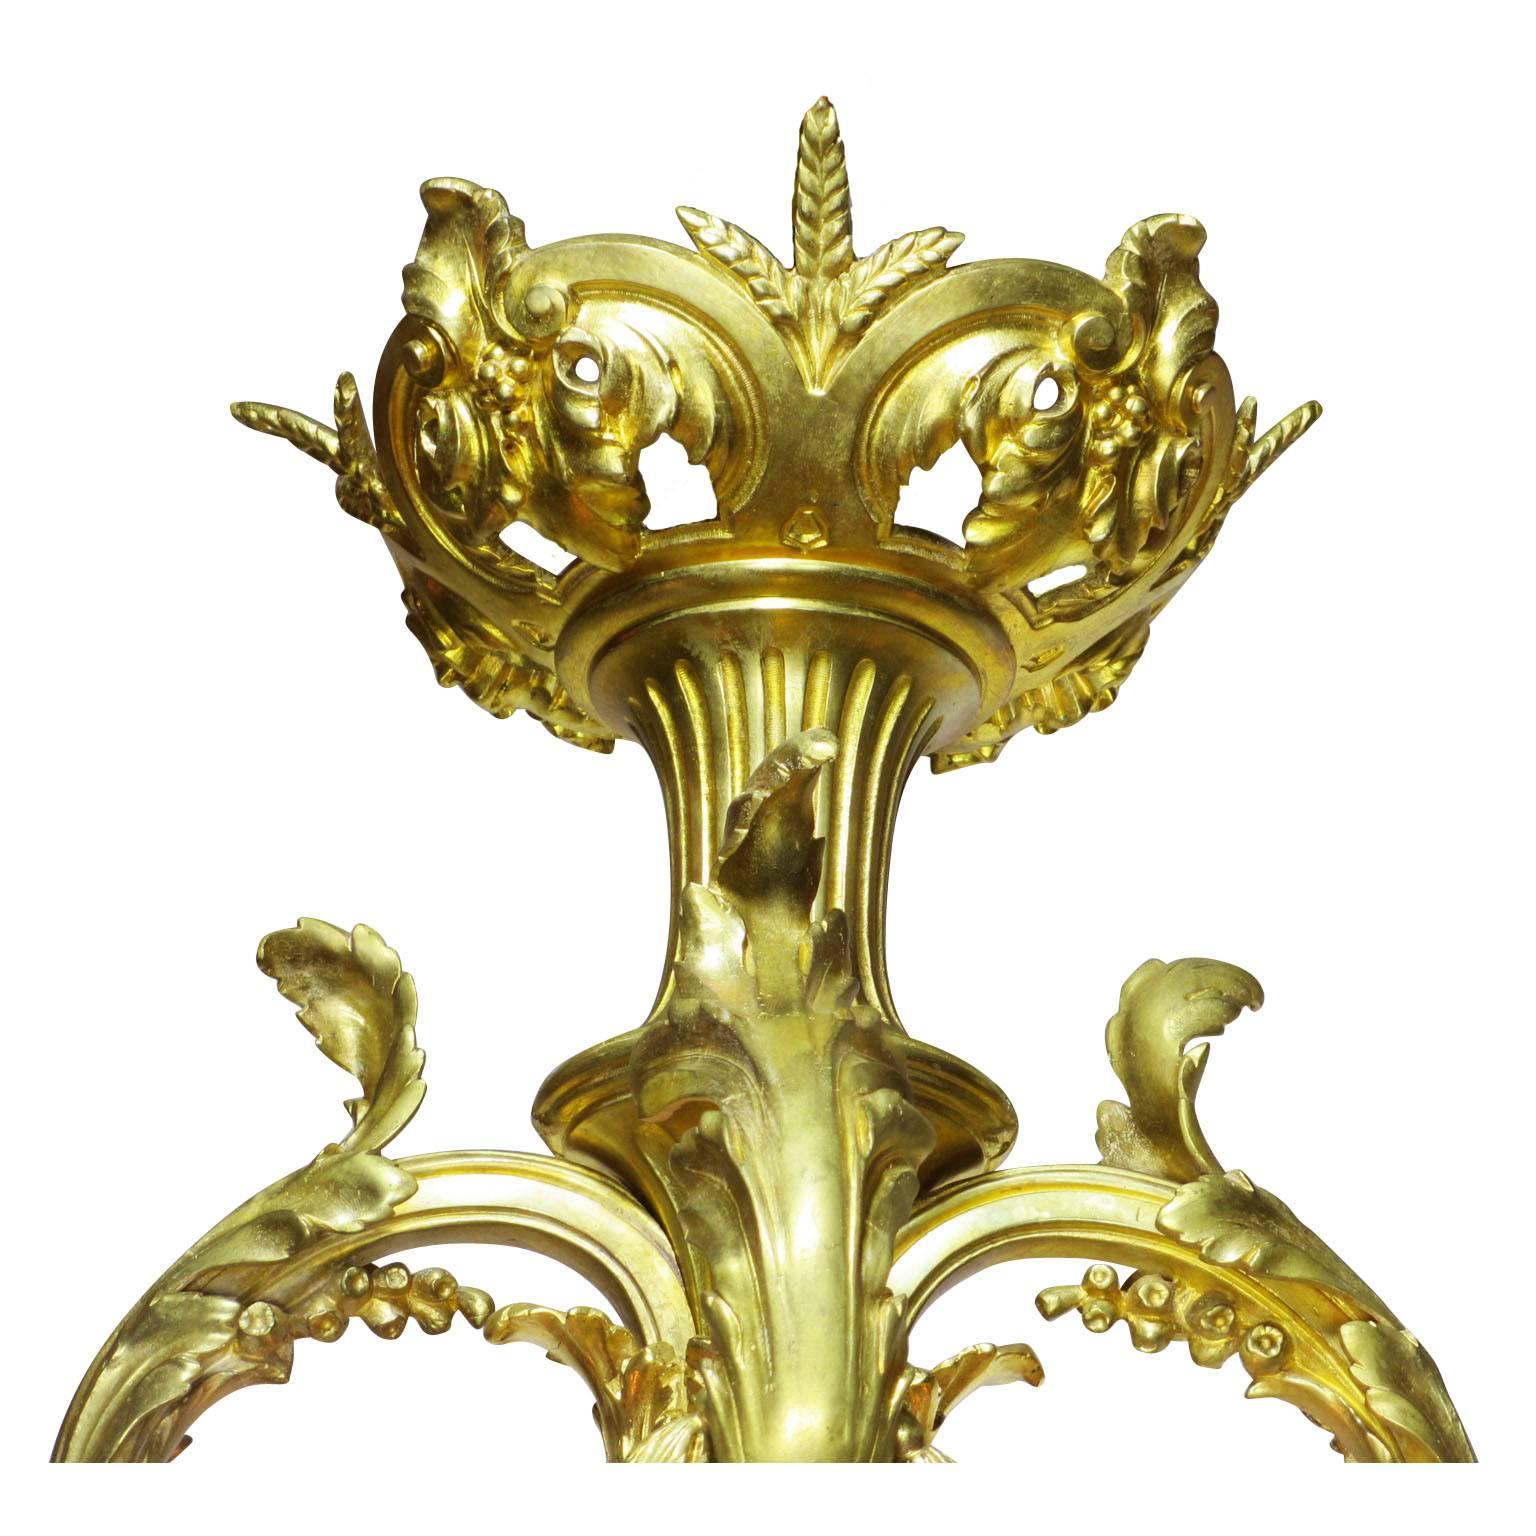 Palatial French 19th/20th Century Louis XIV Style Gilt-Bronze Orante Chandelier  For Sale 5